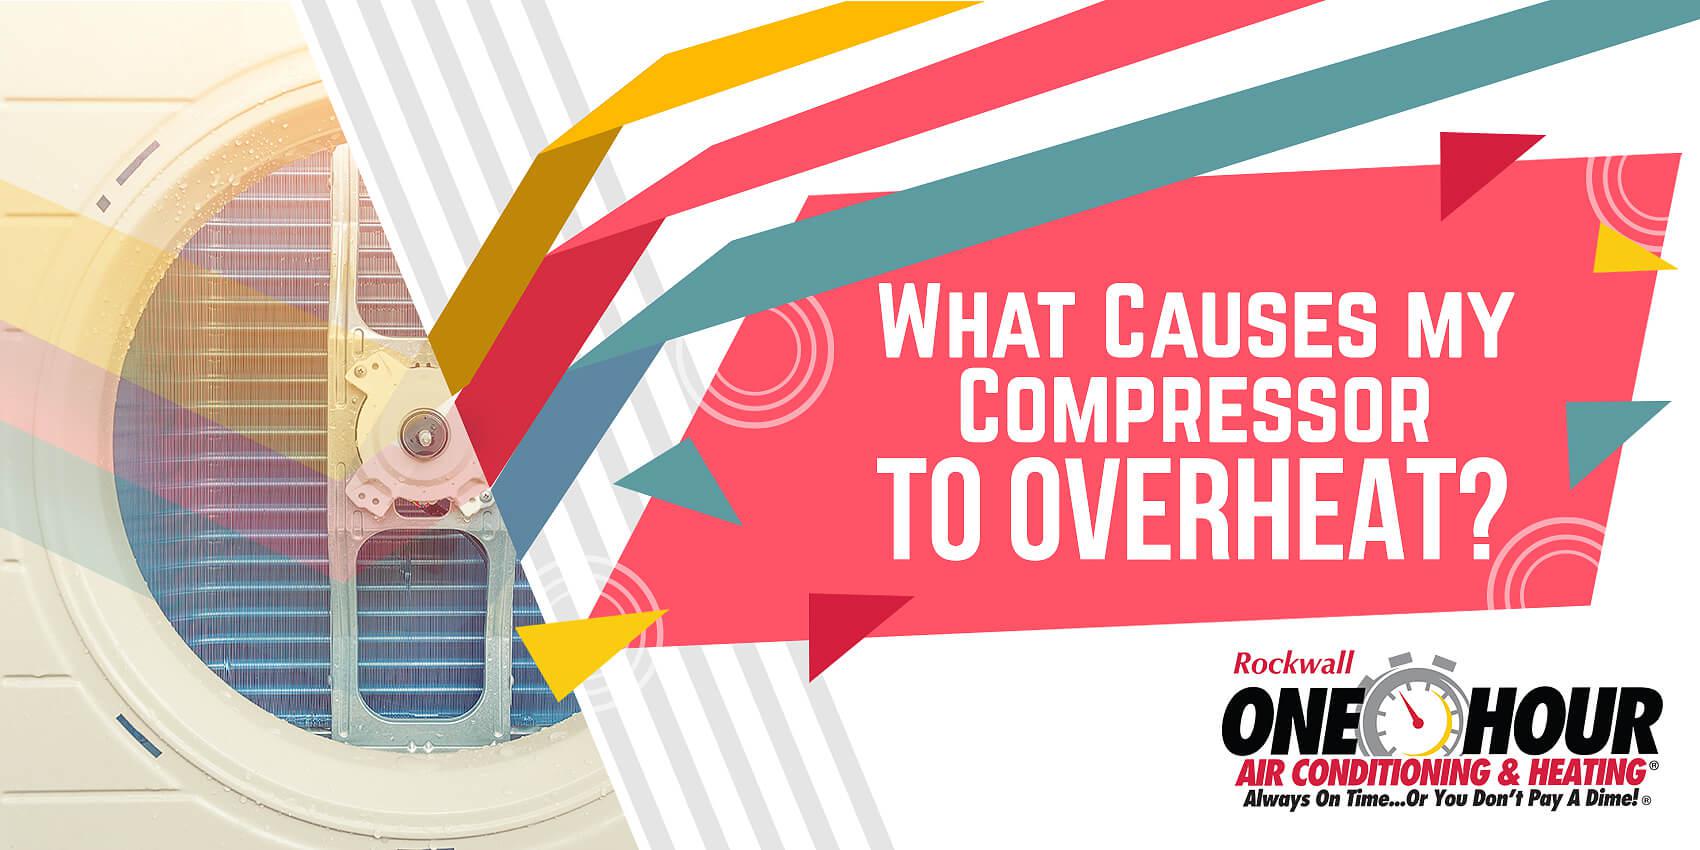 What Causes My Compressor To Overheat?